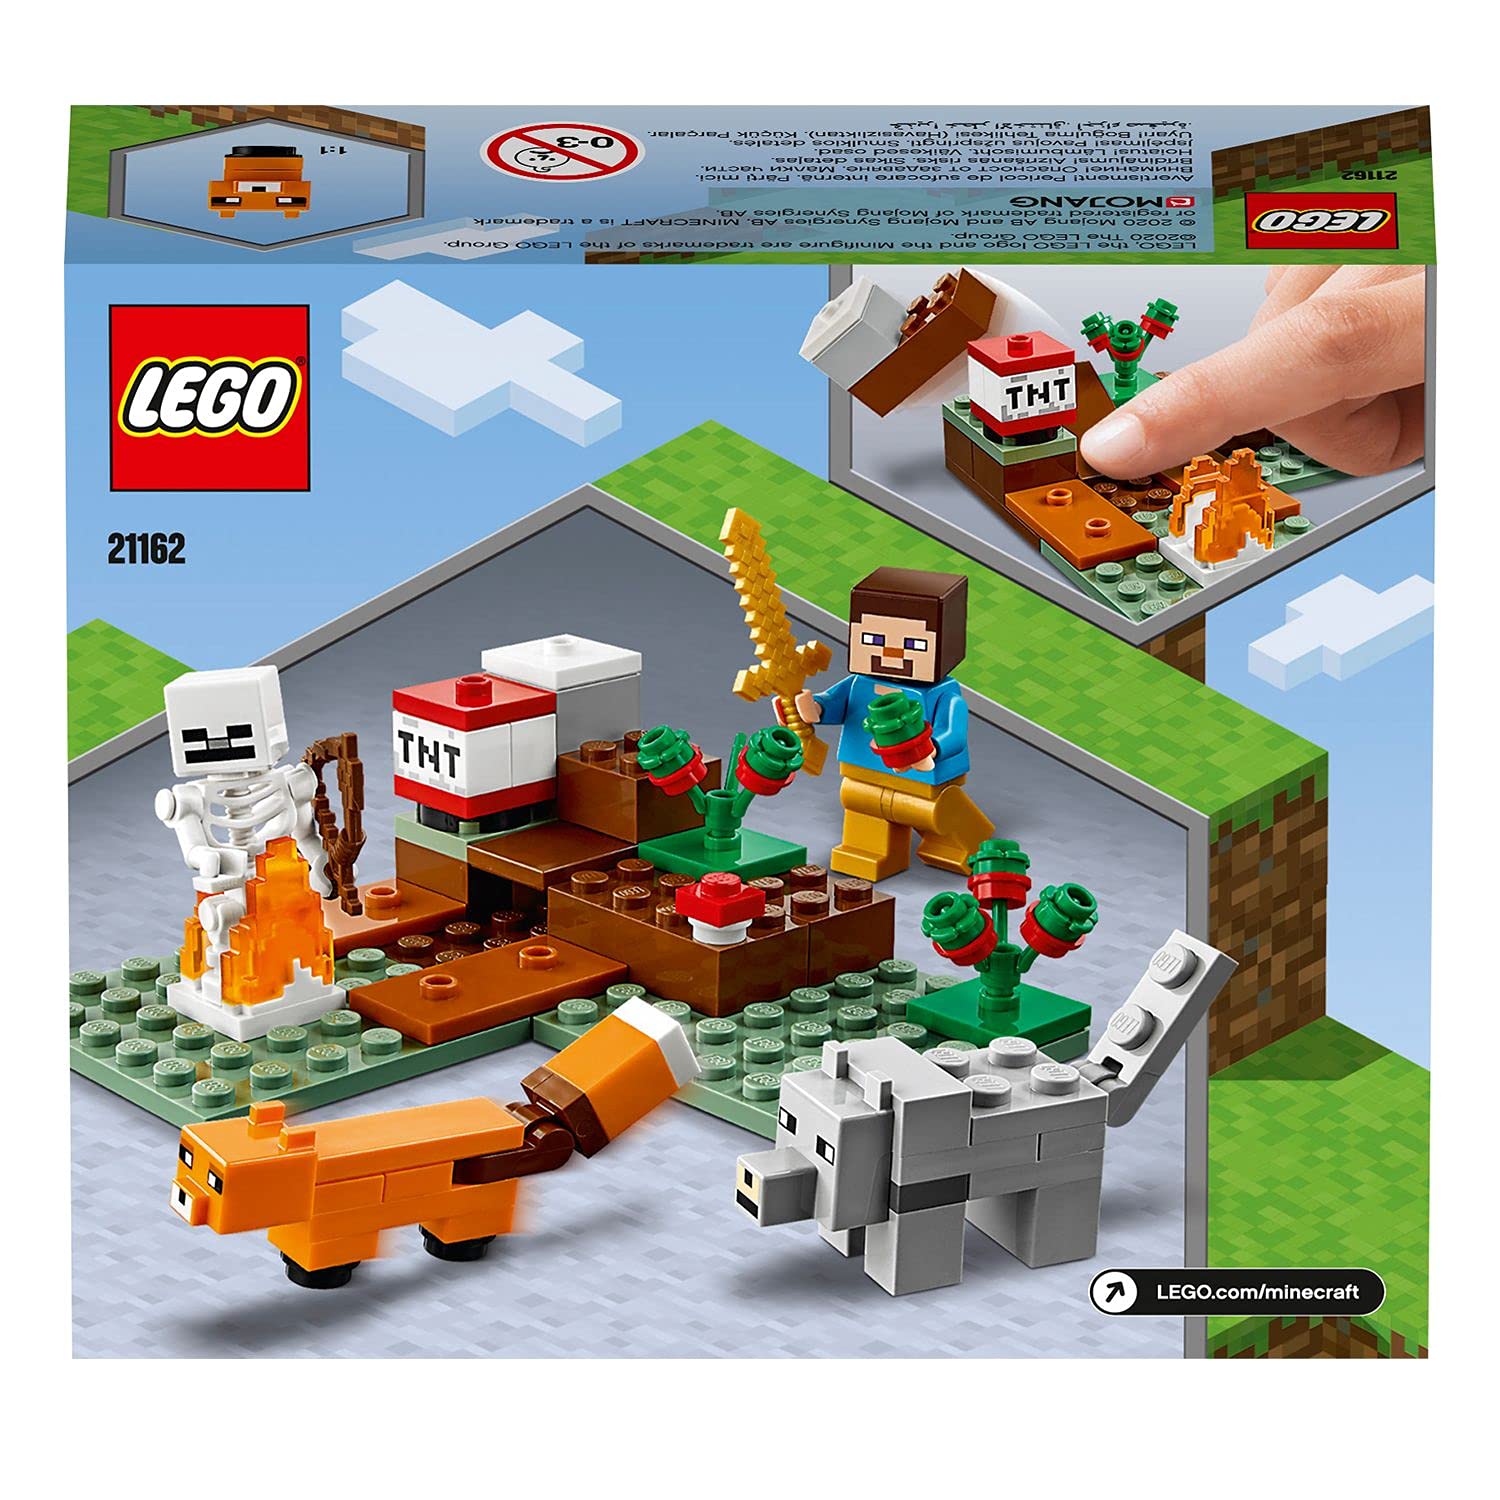 LEGO 21162 Minecraft The Taiga Adventure Building Set with Steve, Wolf and Fox Figures, Toys for Kids for 7+ Years Old